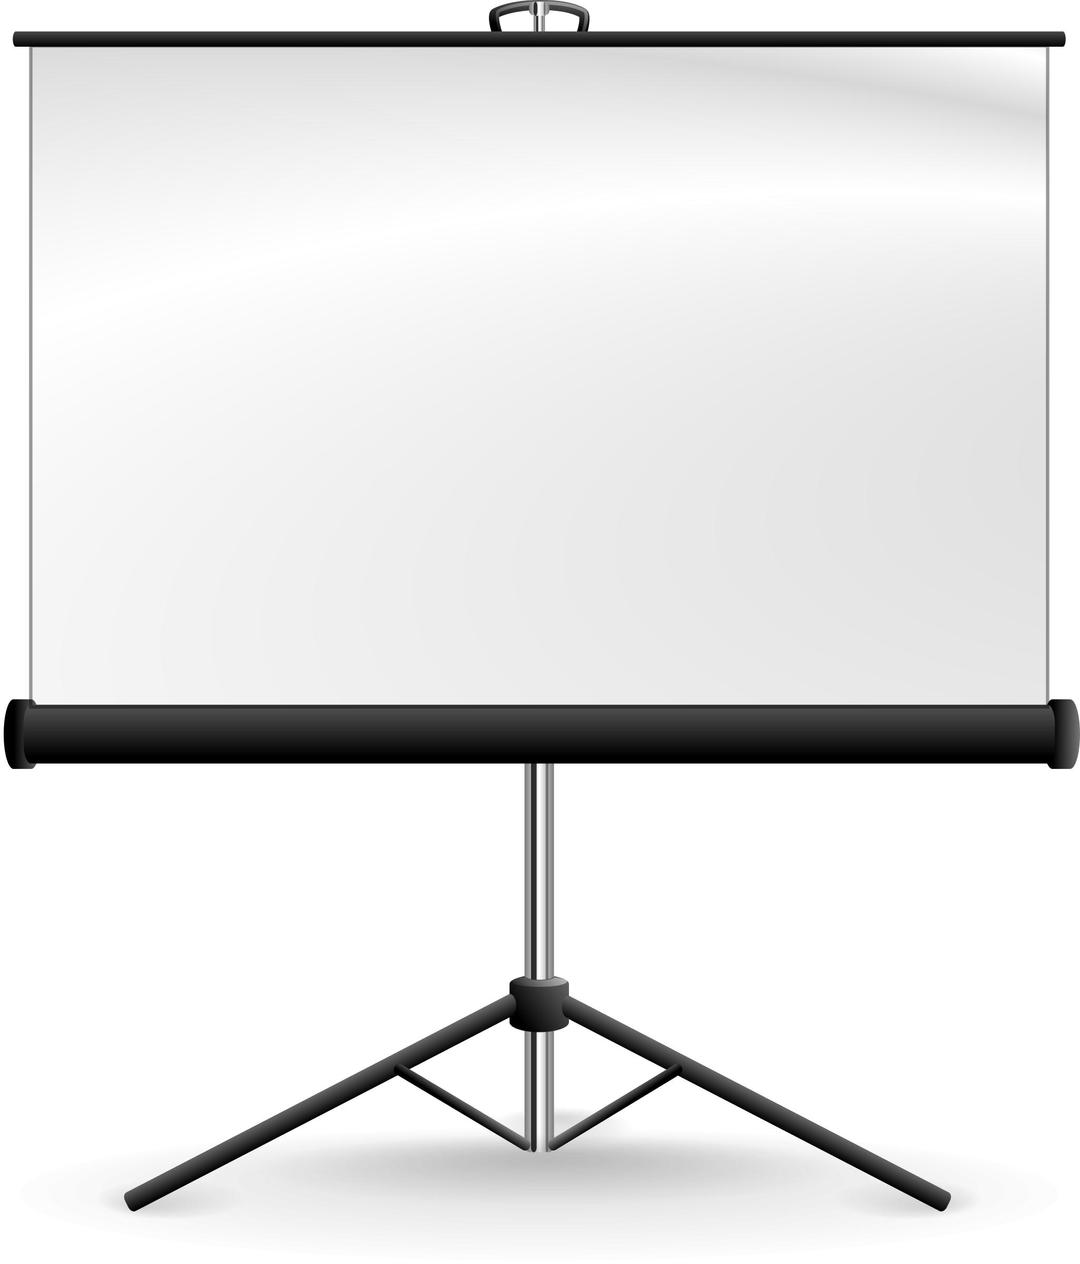 Portable Projection Screen png transparent